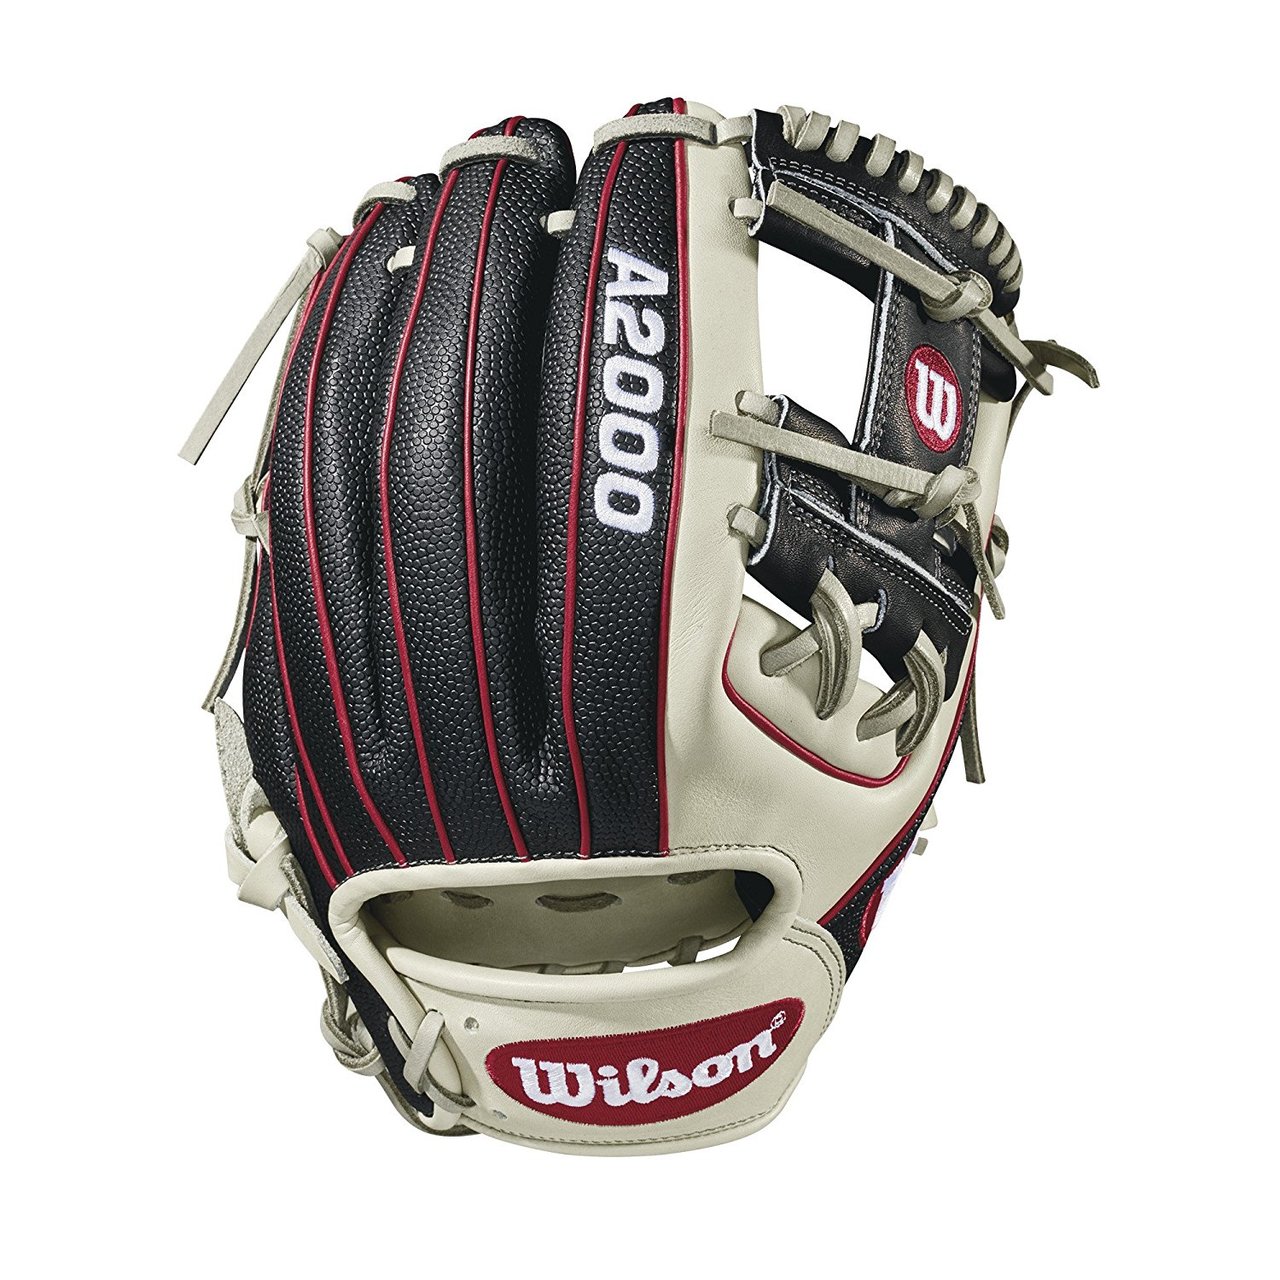 The new A2000® 1786 SS takes Wilson's most popular infield pattern and pairs it with innovative SuperSkin™ material. Infielders love the 1786 because the H-web and double X lacing at the web base keep the pocket shallow for an easy transfer. This model -- made with Black SuperSkin™ and Silver and Brick Red Pro Stock leather -- is often broken in with a flattened, flared shape.     The Wilson A2000®, the most famous baseball glove in the game, continues to improve. Master Craftsman Shigeaki Aso and his glove team are constantly refining Pro Stock patterns with the insights of players from back fields to Major League stadiums to bring the best possible product to the diamond. Made with Pro Stock leather identified specifically for Wilson gloves for its durability and unmatched feel, A2000®s are built to break in perfectly and last for multiple seasons. It’s the perfect ball glove for hard-working players.     The A2000® SuperSkin™ gloves are the utility players of the Wilson lineup. A versatile mix of Pro Stock leather and man-made SuperSkin™ makes the glove stronger, lighter and easier to break in than the all-leather A2000.           